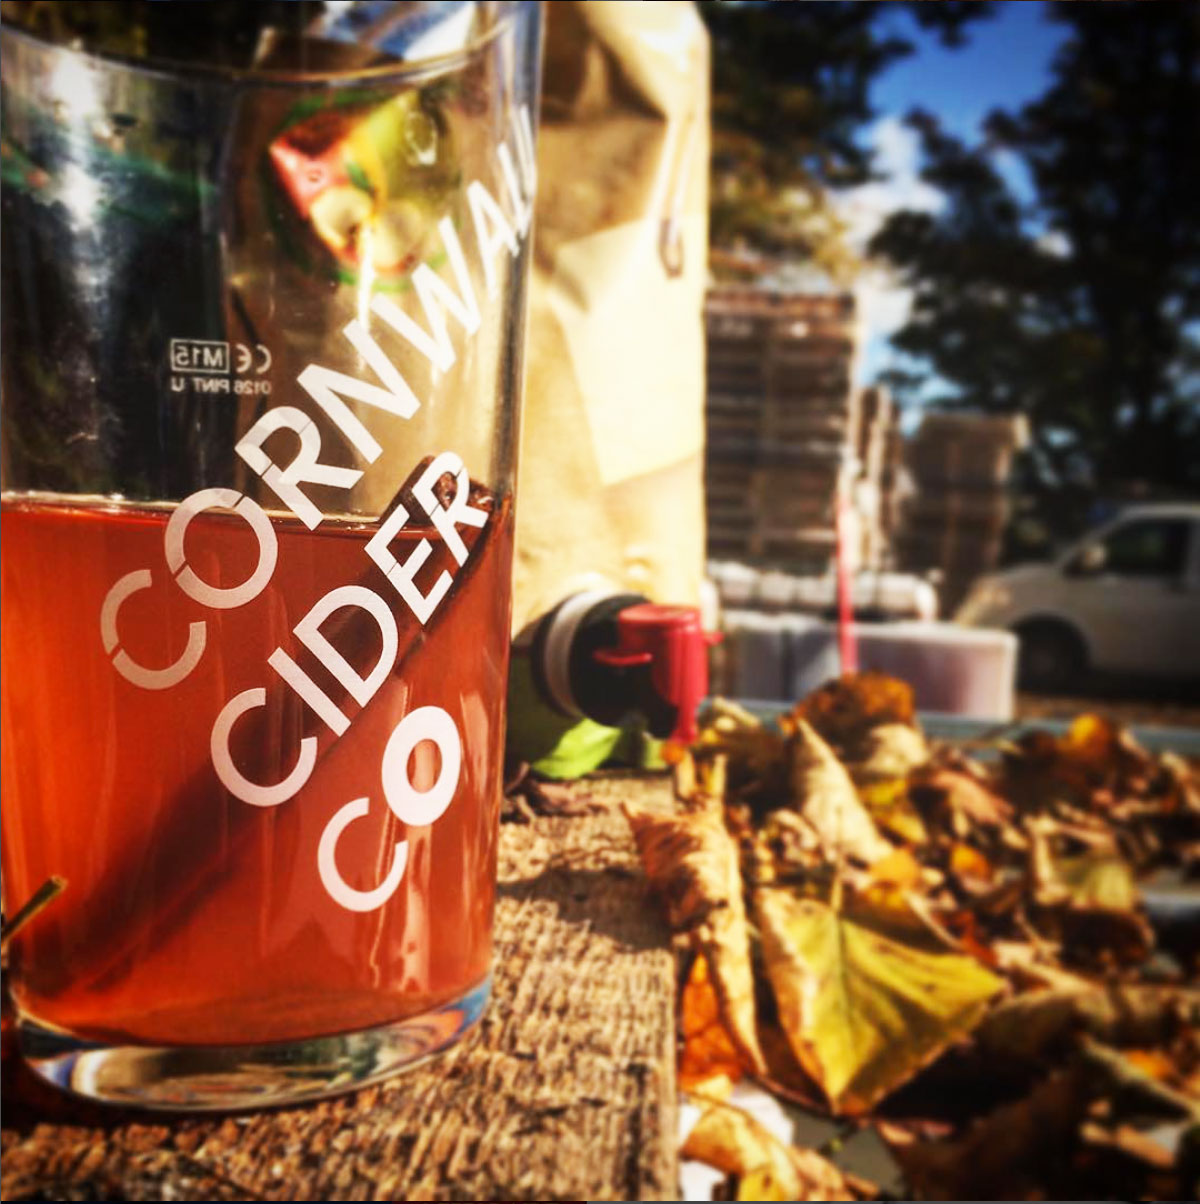 cornwall-cider-co-square-gallery-02.jpg